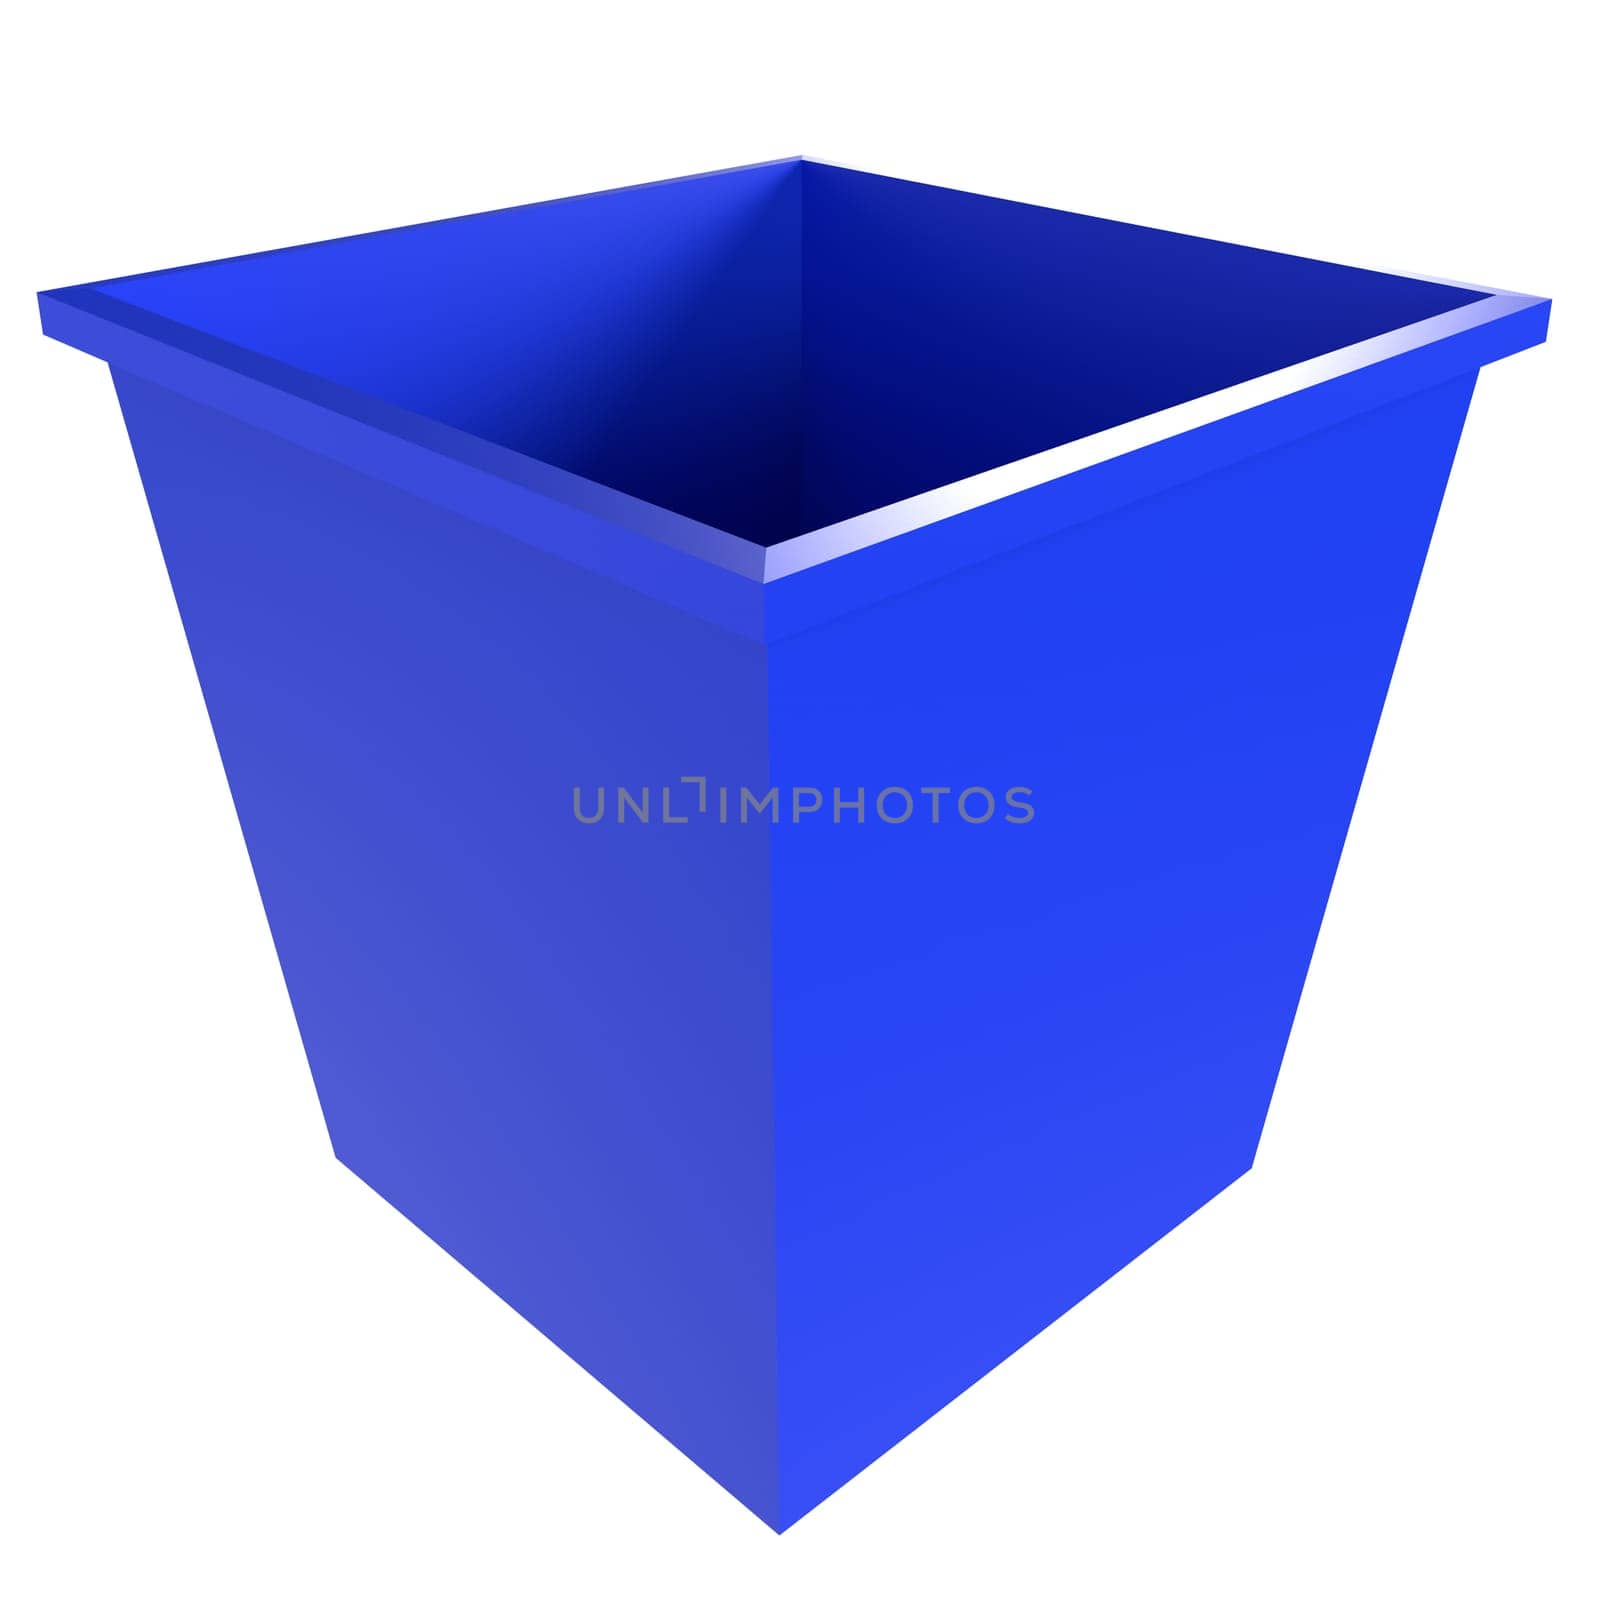 Blue Recycle Bin isolated on white background. High quality 3d illustration